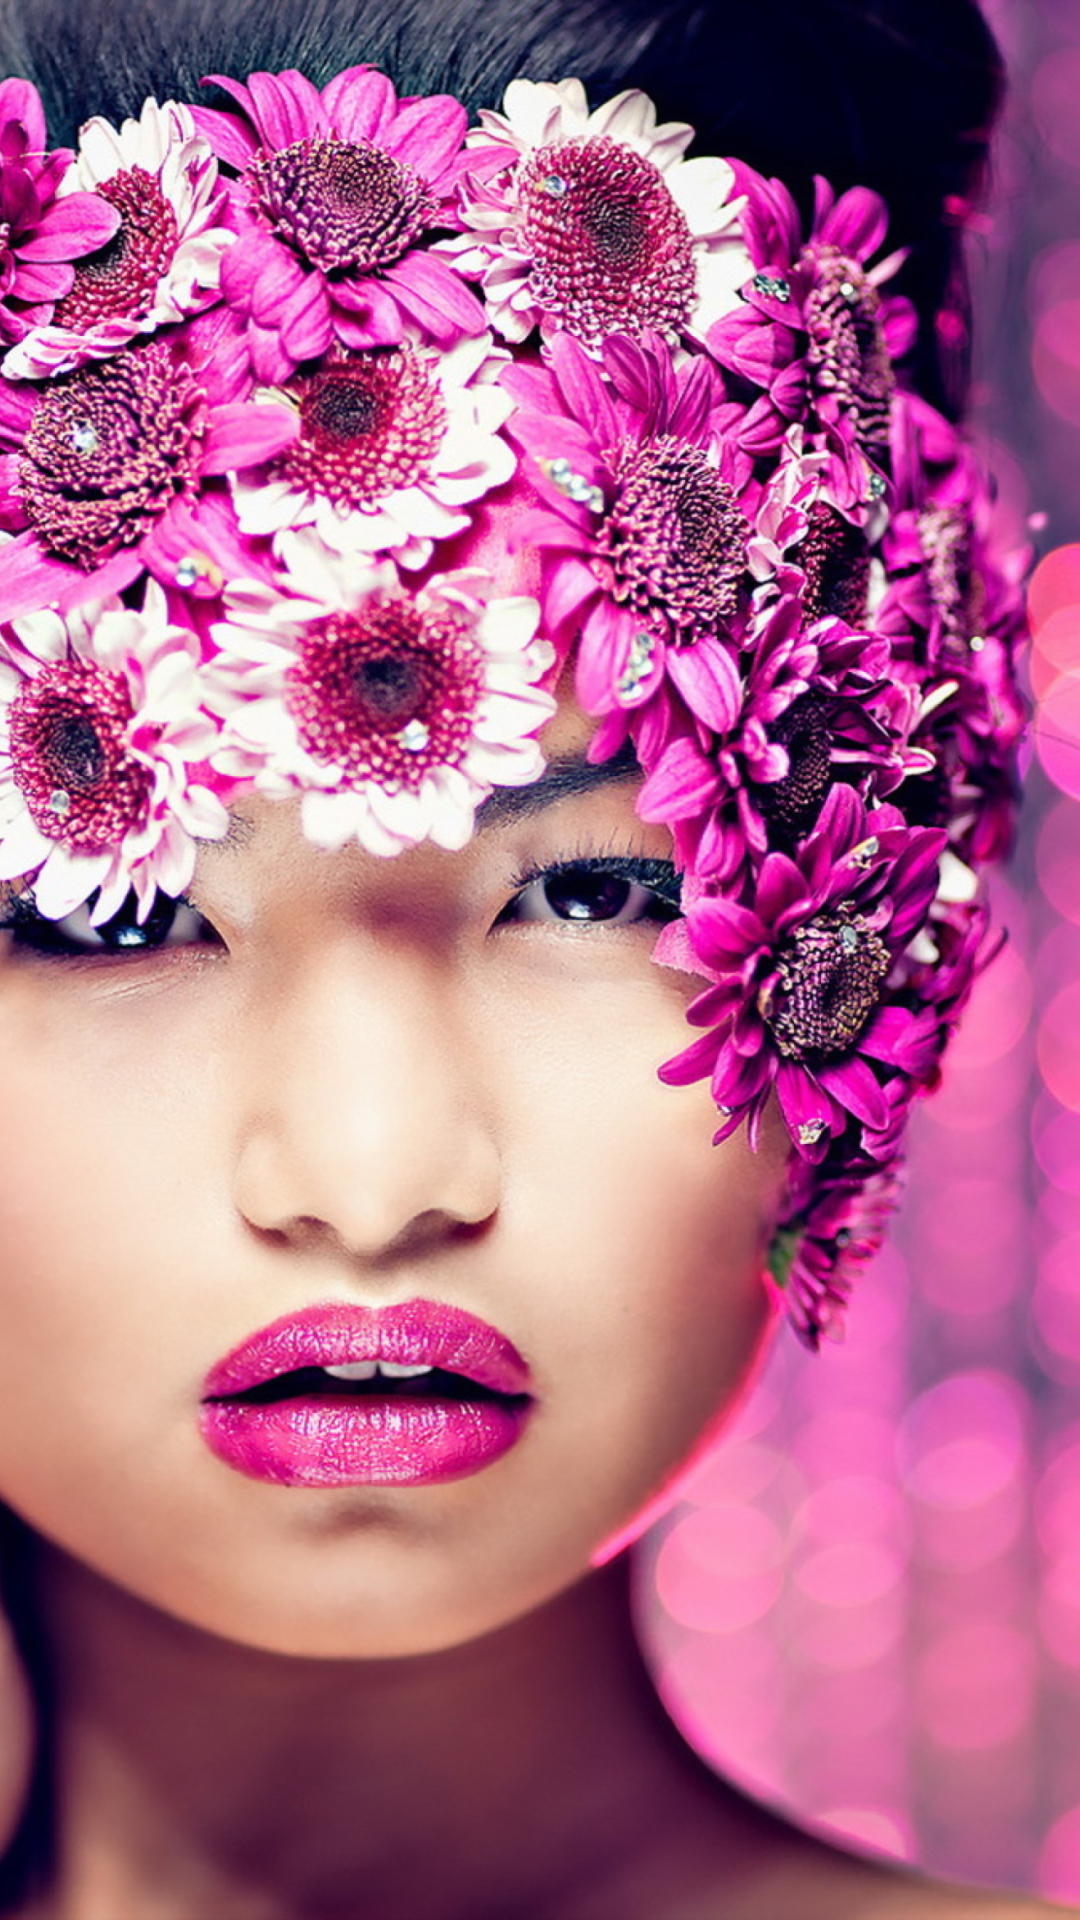 Asian Fashion Model With Pink Flower Wreath wallpaper 1080x1920